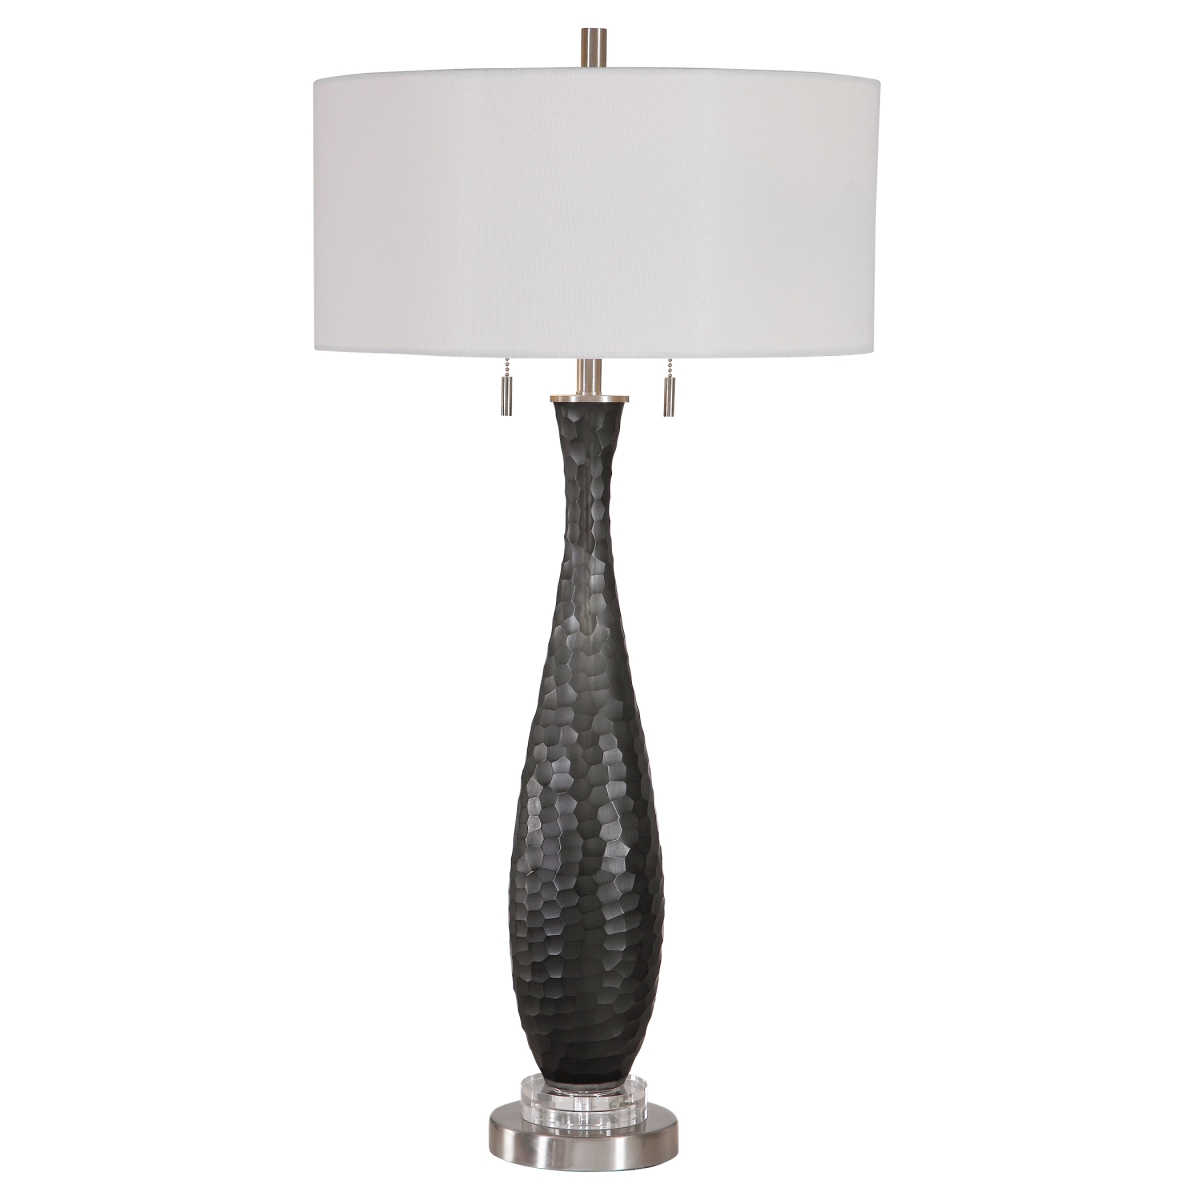 Picture of 212 Main 26373 Jothan Frosted Black Table Lamp